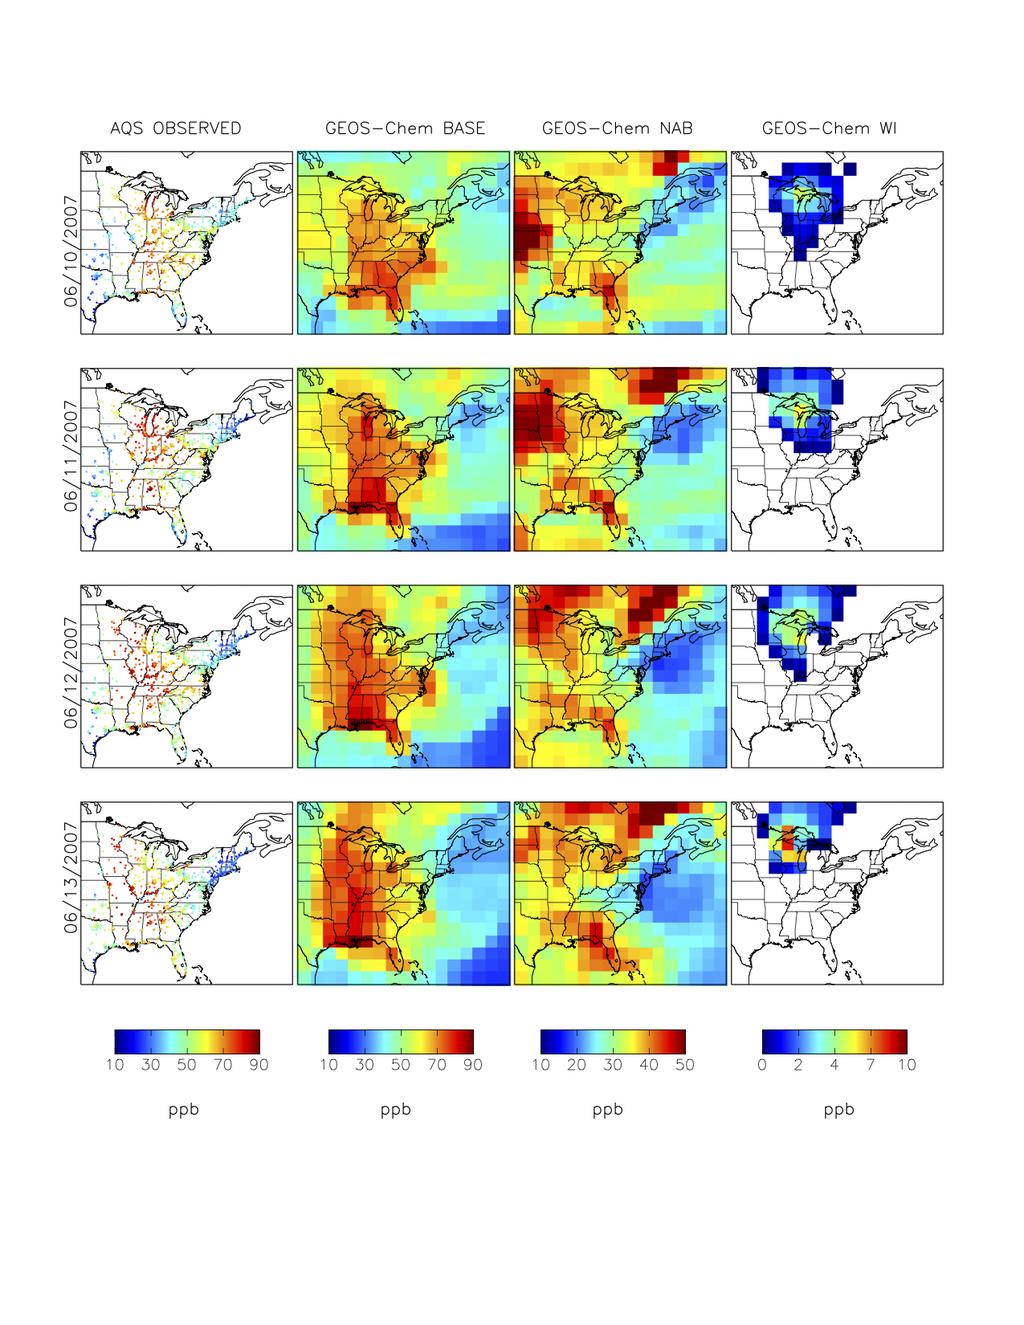 Figure 28: Source attribution for ozone during WI 2007 event. This plot extends from pages 15-17. WI contribution was calculated by: GEOS-Chem Base No WI contribution = WI contribution.